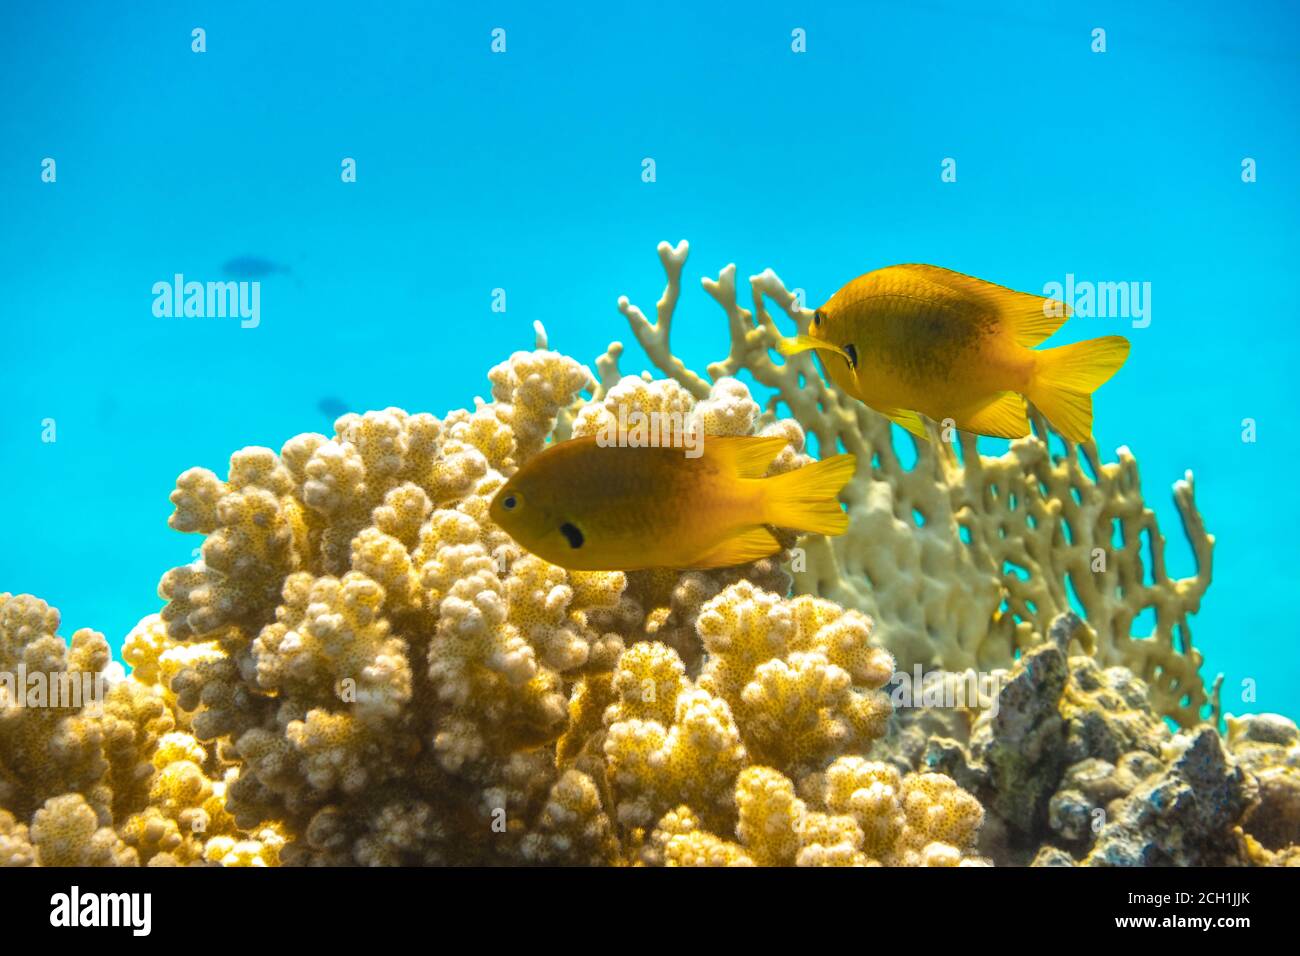 Bright Yellow Tropical Fish in the Ocean over Coral Reef. Close Up of Two Small Saltwater Gold Fish in Clear Blue Water. Underwater World of Red Sea, Stock Photo